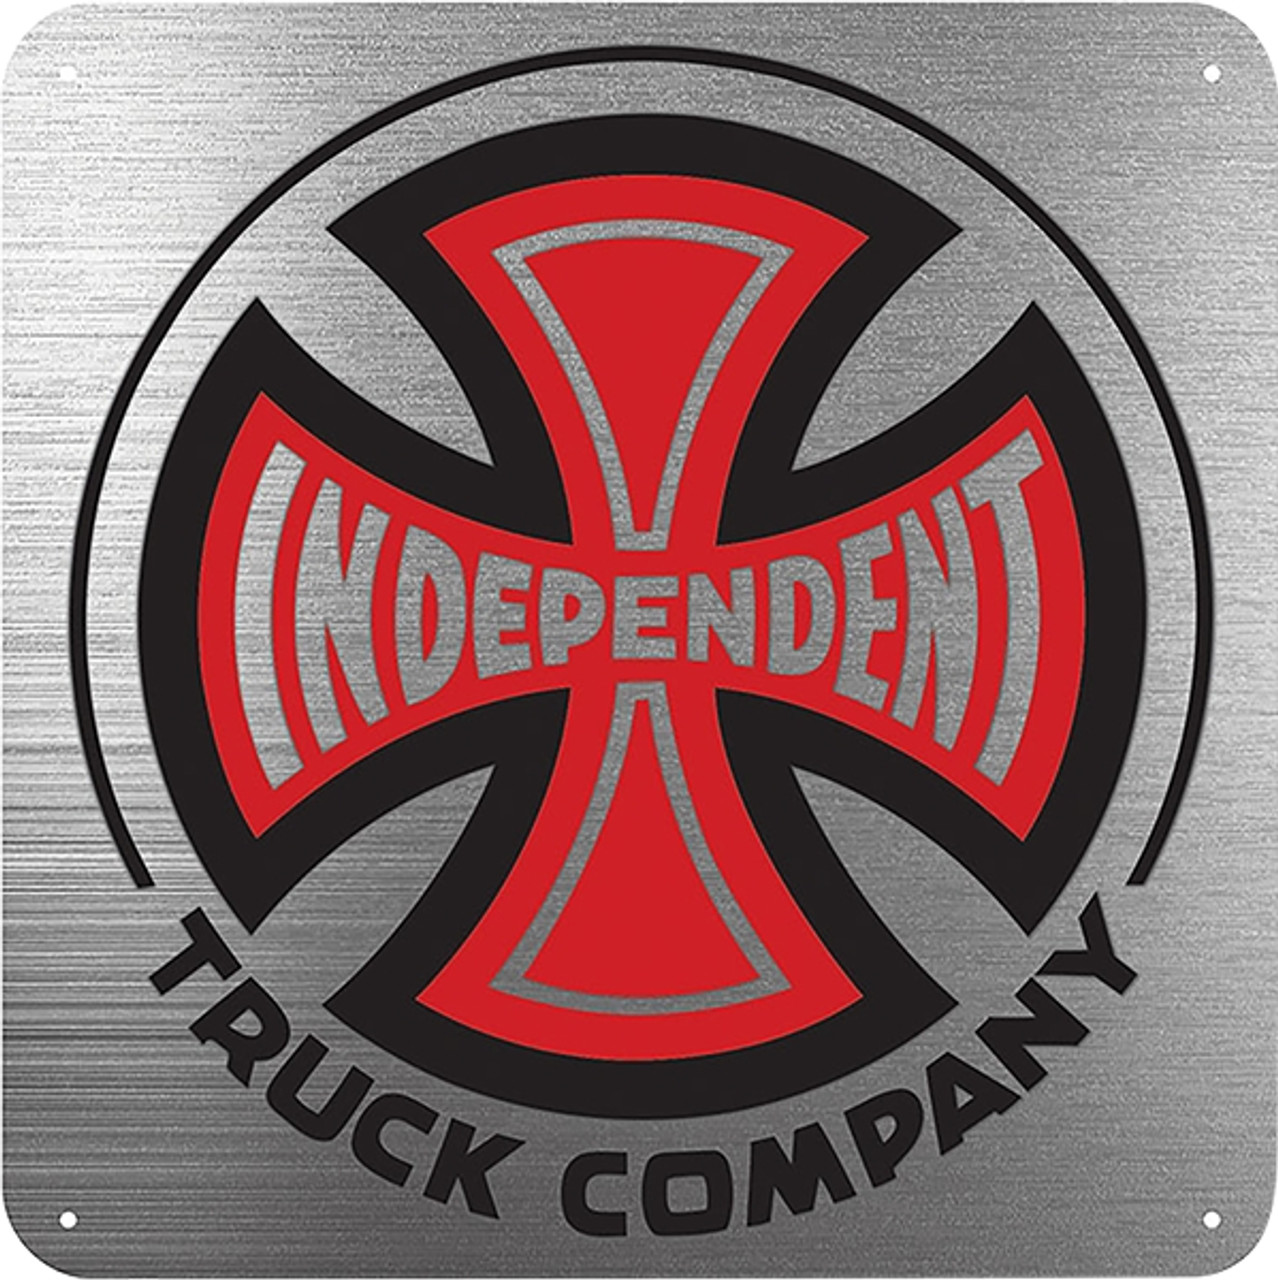 INDEPENDENT TRUCK CO METAL SIGN 20"x20" SILVER